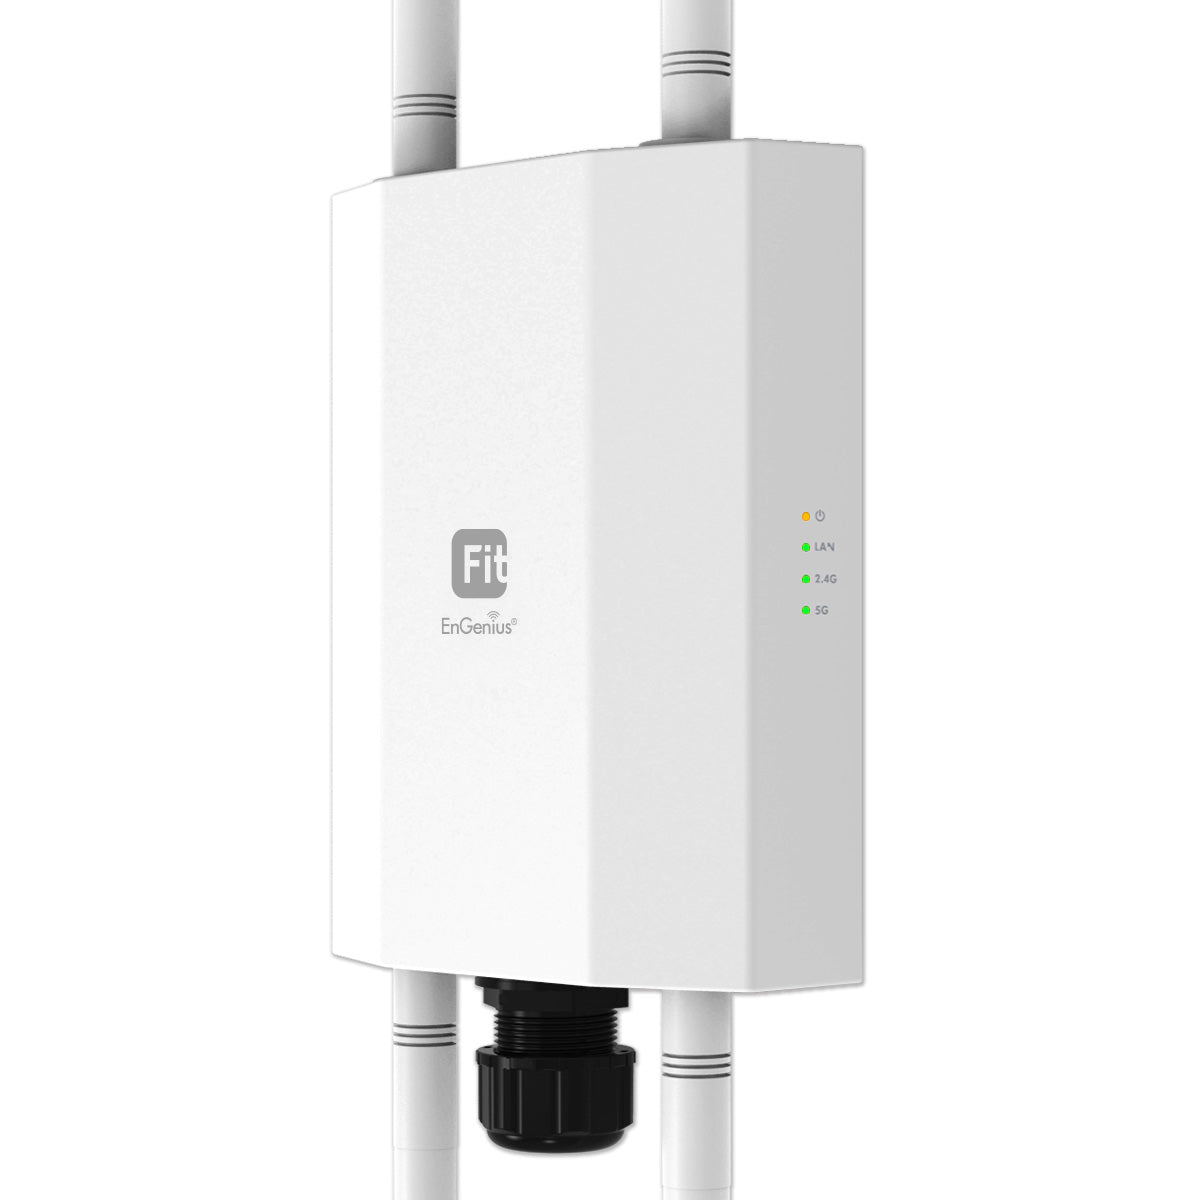 EnGenius announces its first Wi-Fi 6 wall-plate access point and it looks  sleek 